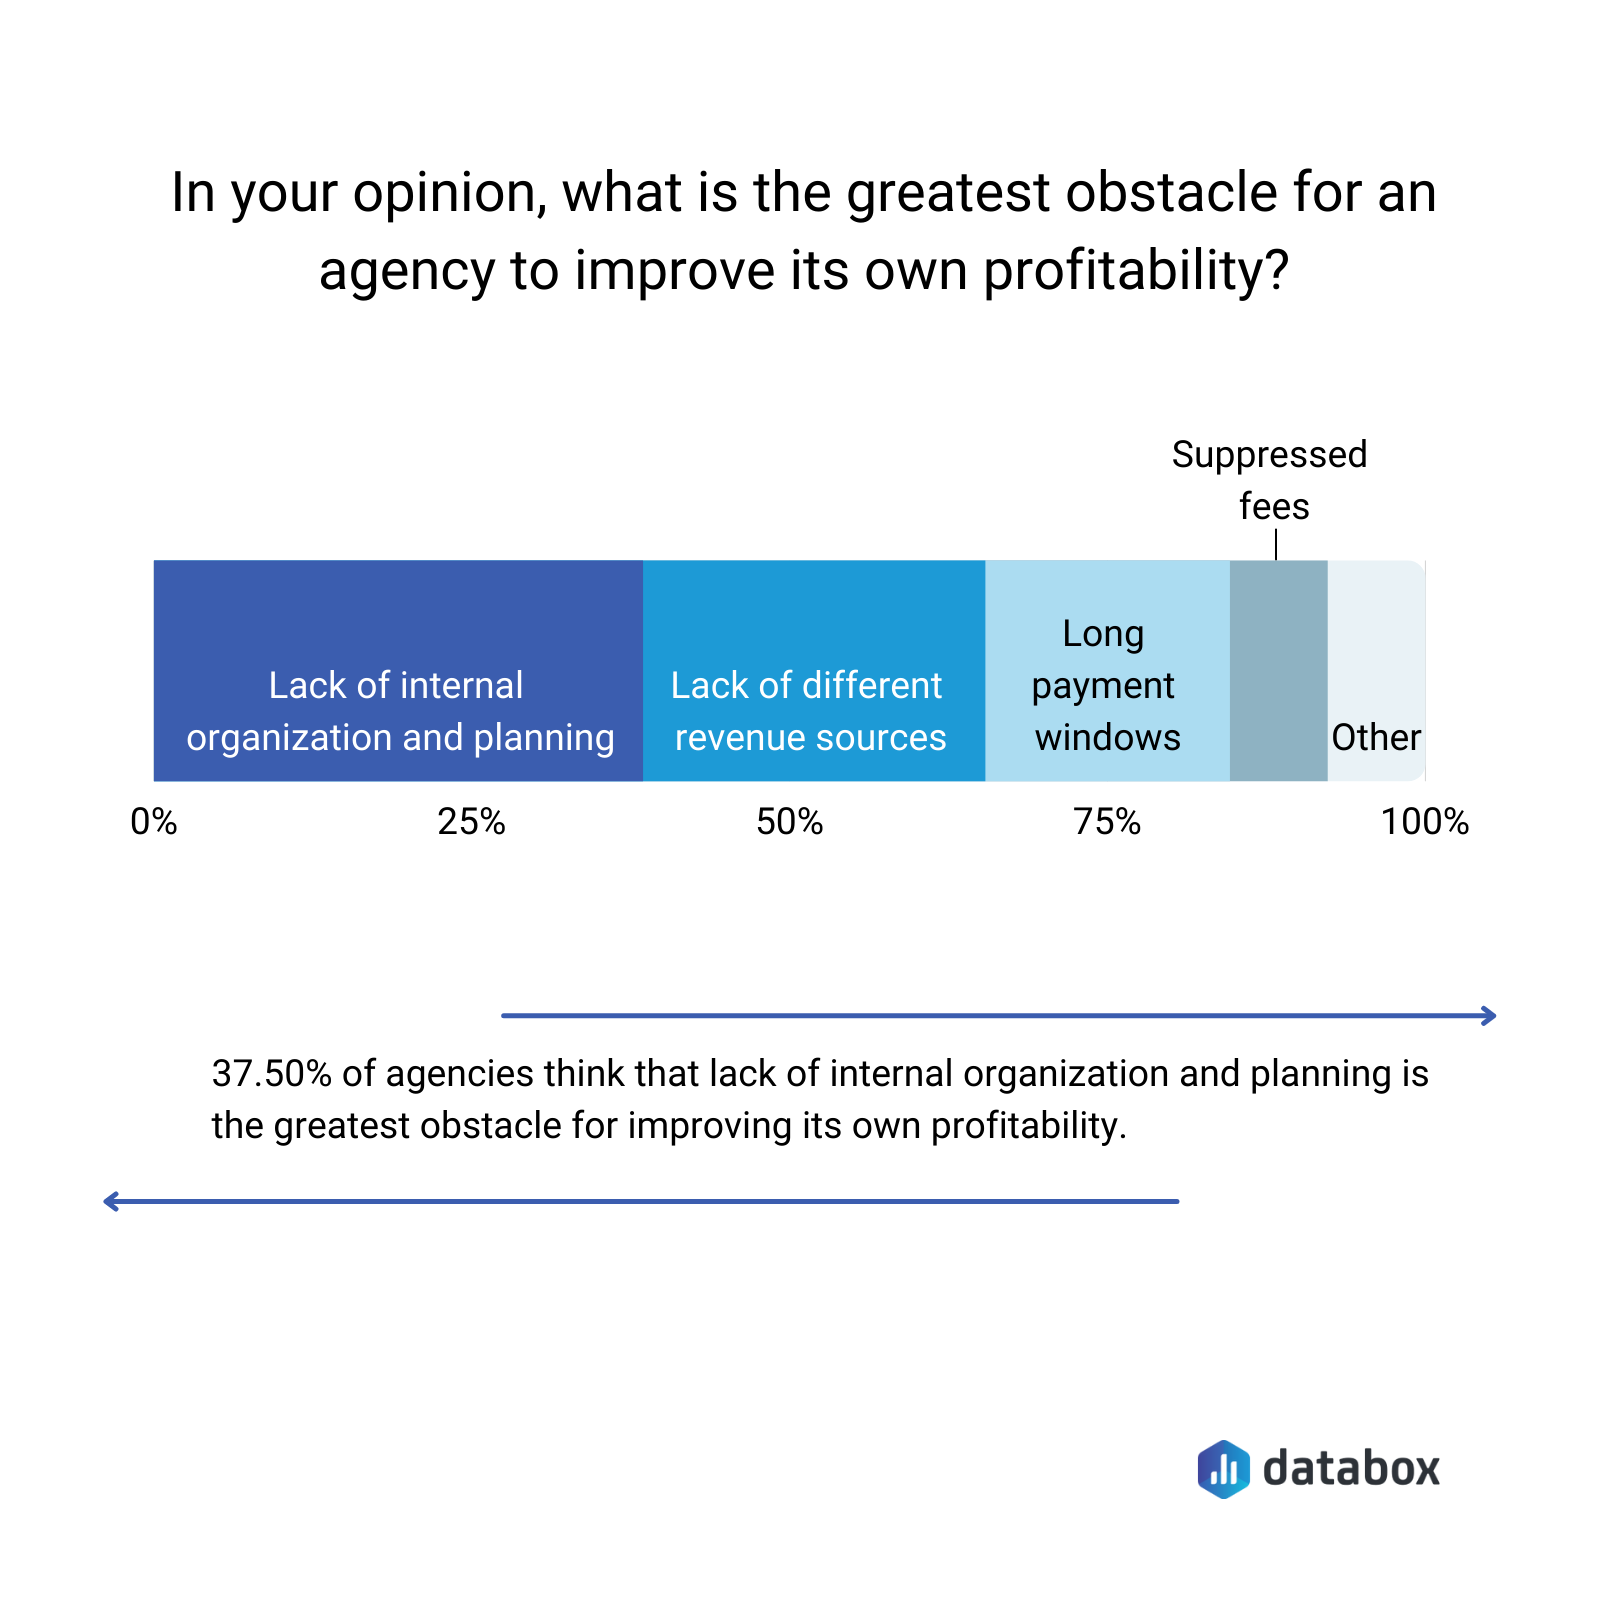 Greatest obstacles for an agency to improve its own profitability